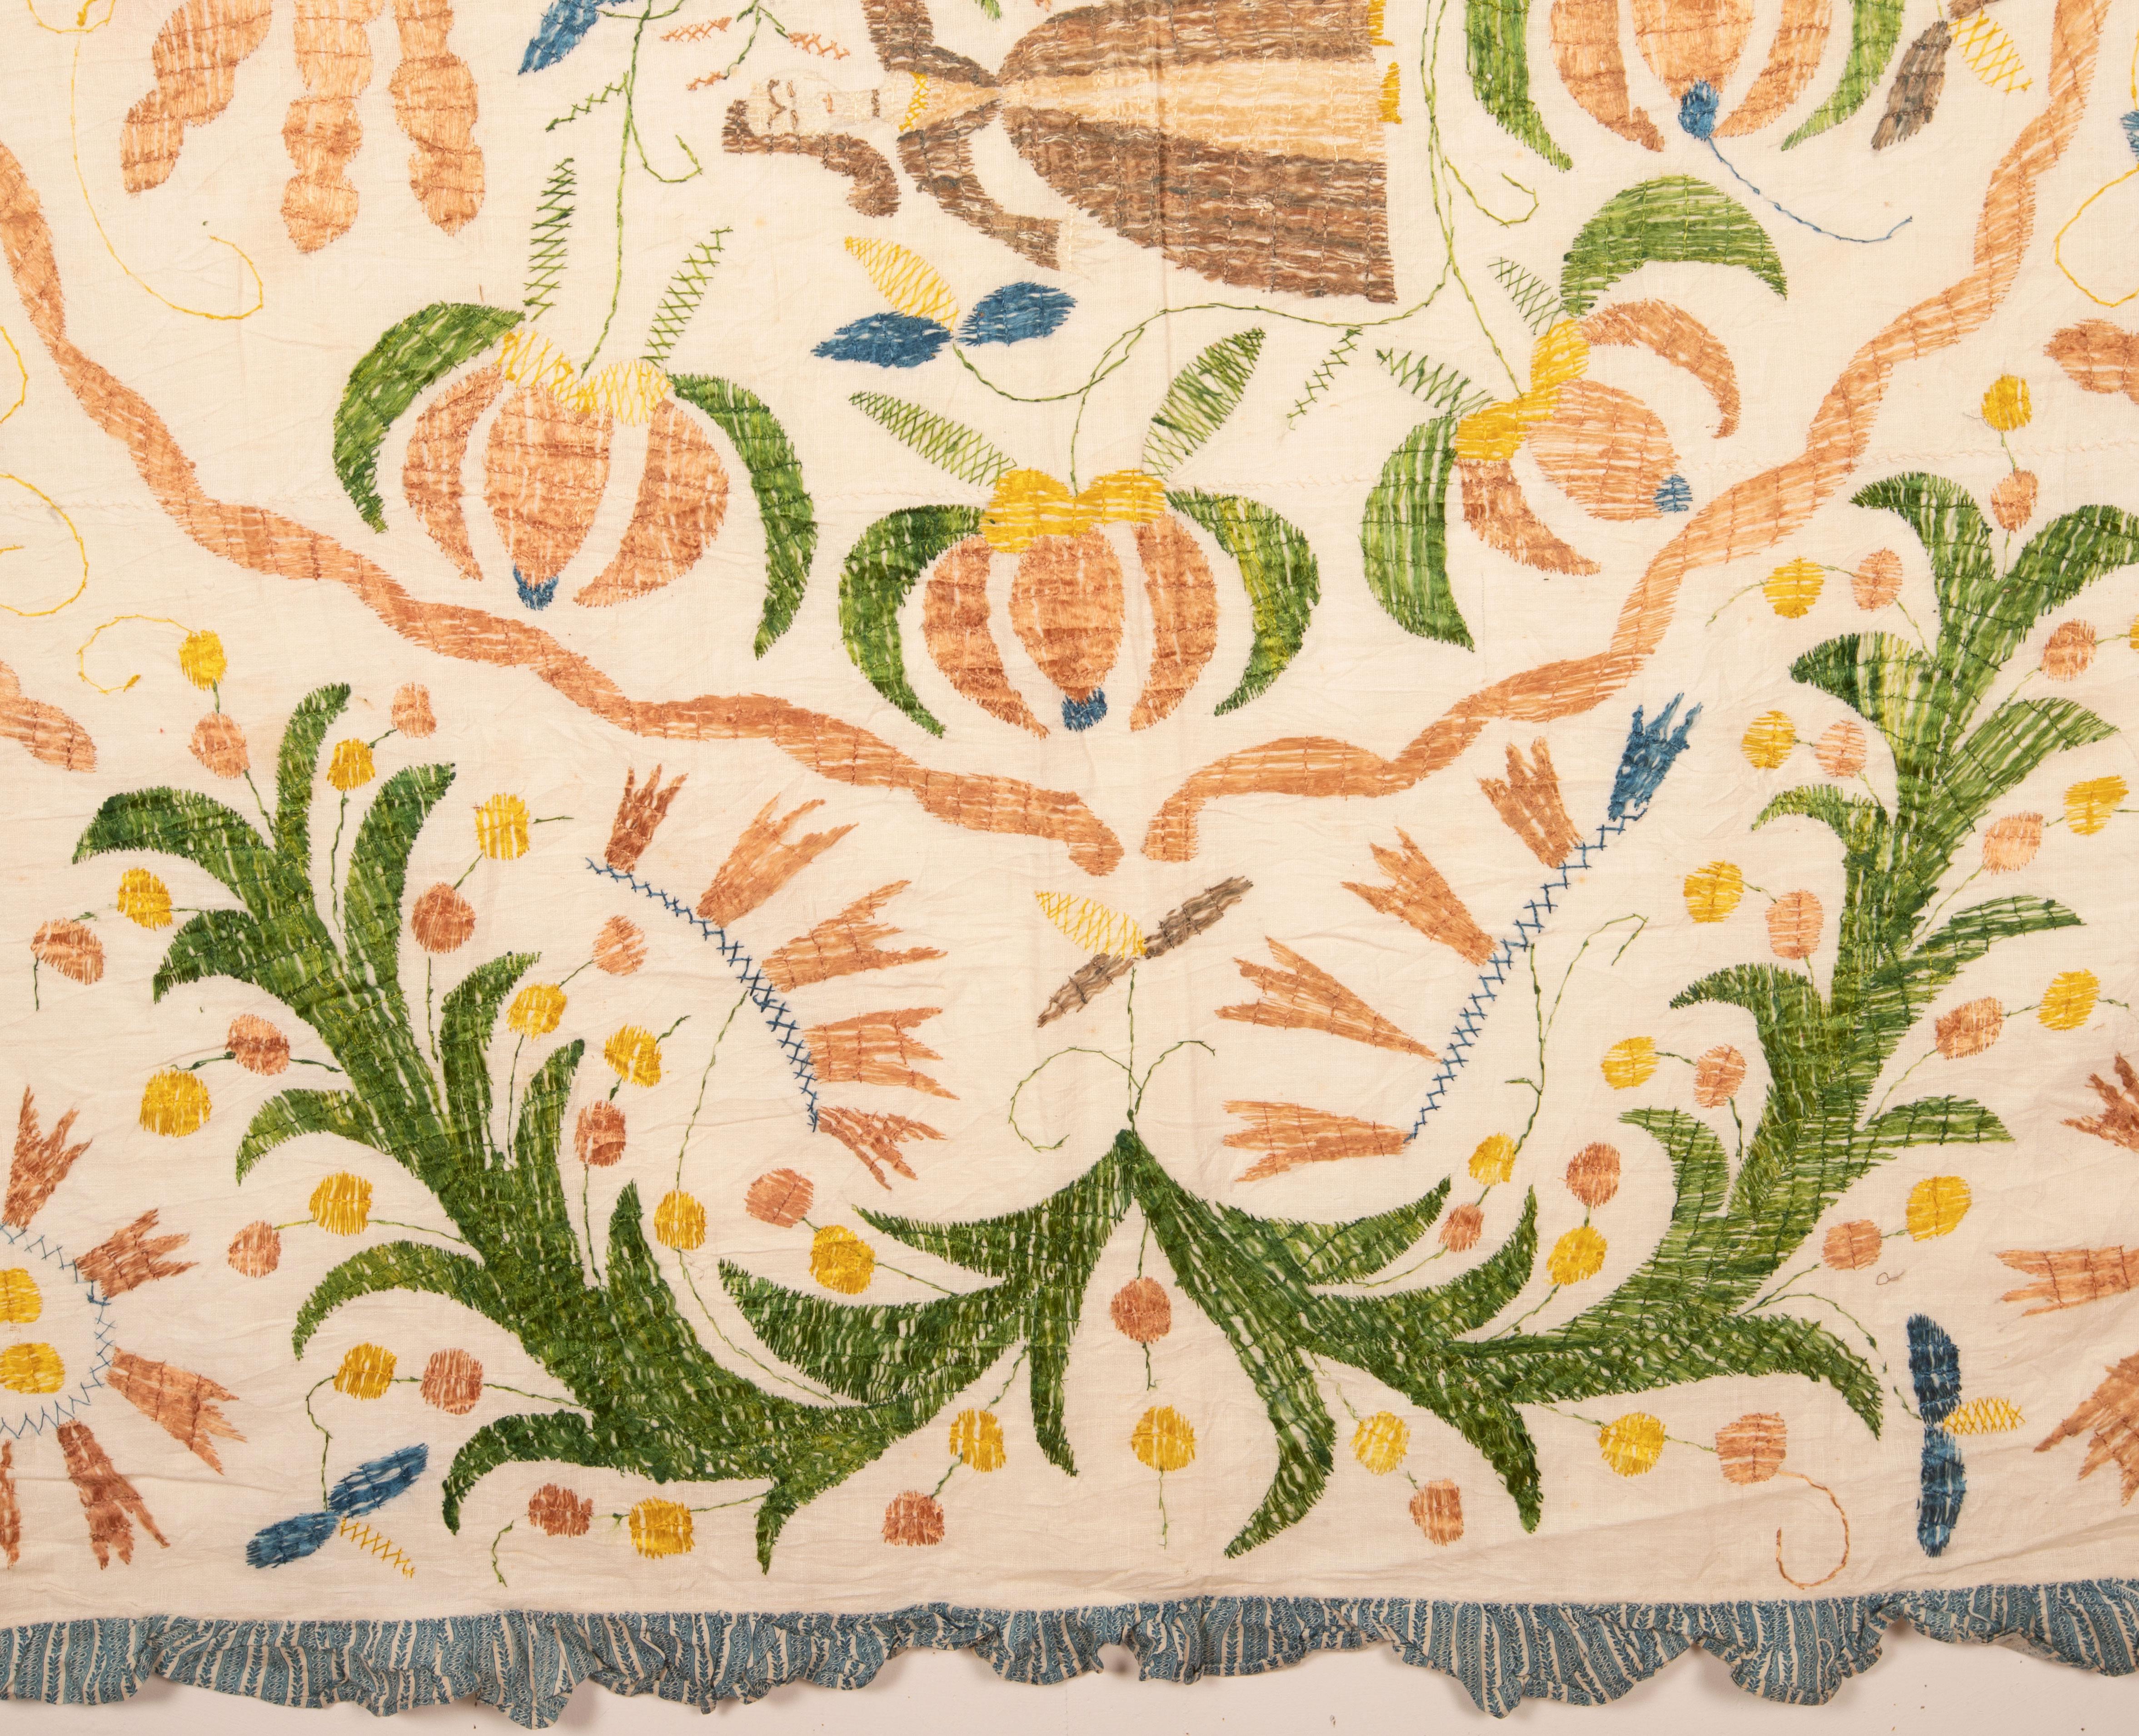 Embroidered Pictorial Castelo Branco Embroidery, Portugal, 19th C